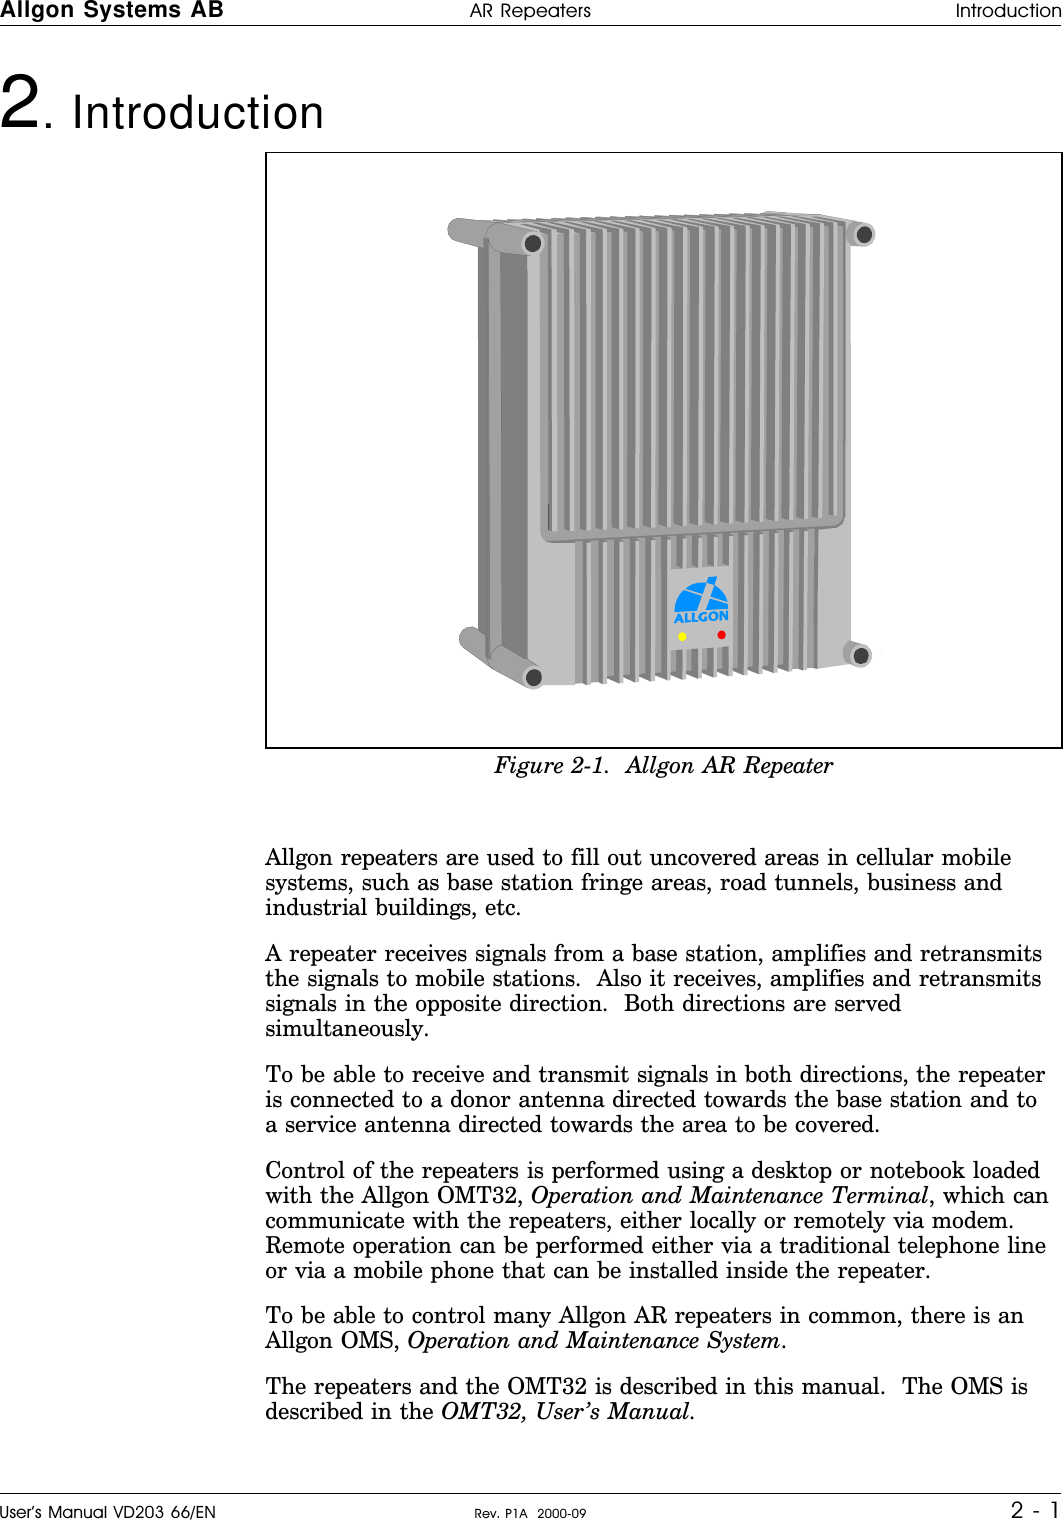 2. Introduction   Allgon repeaters are used to fill out uncovered areas in cellular mobilesystems, such as base station fringe areas, road tunnels, business andindustrial buildings, etc.A repeater receives signals from a base station, amplifies and retransmitsthe signals to mobile stations.  Also it receives, amplifies and retransmitssignals in the opposite direction.  Both directions are servedsimultaneously.To be able to receive and transmit signals in both directions, the repeateris connected to a donor antenna directed towards the base station and toa service antenna directed towards the area to be covered.Control of the repeaters is performed using a desktop or notebook loadedwith the Allgon OMT32, Operation and Maintenance Terminal, which cancommunicate with the repeaters, either locally or remotely via modem.Remote operation can be performed either via a traditional telephone lineor via a mobile phone that can be installed inside the repeater.To be able to control many Allgon AR repeaters in common, there is anAllgon OMS, Operation and Maintenance System.The repeaters and the OMT32 is described in this manual.  The OMS isdescribed in the OMT32, User’s Manual.Figure 2-1.  Allgon AR RepeaterAllgon Systems AB AR Repeaters IntroductionUser’s Manual VD203 66/EN Rev. P1A  2000-09 2 - 1